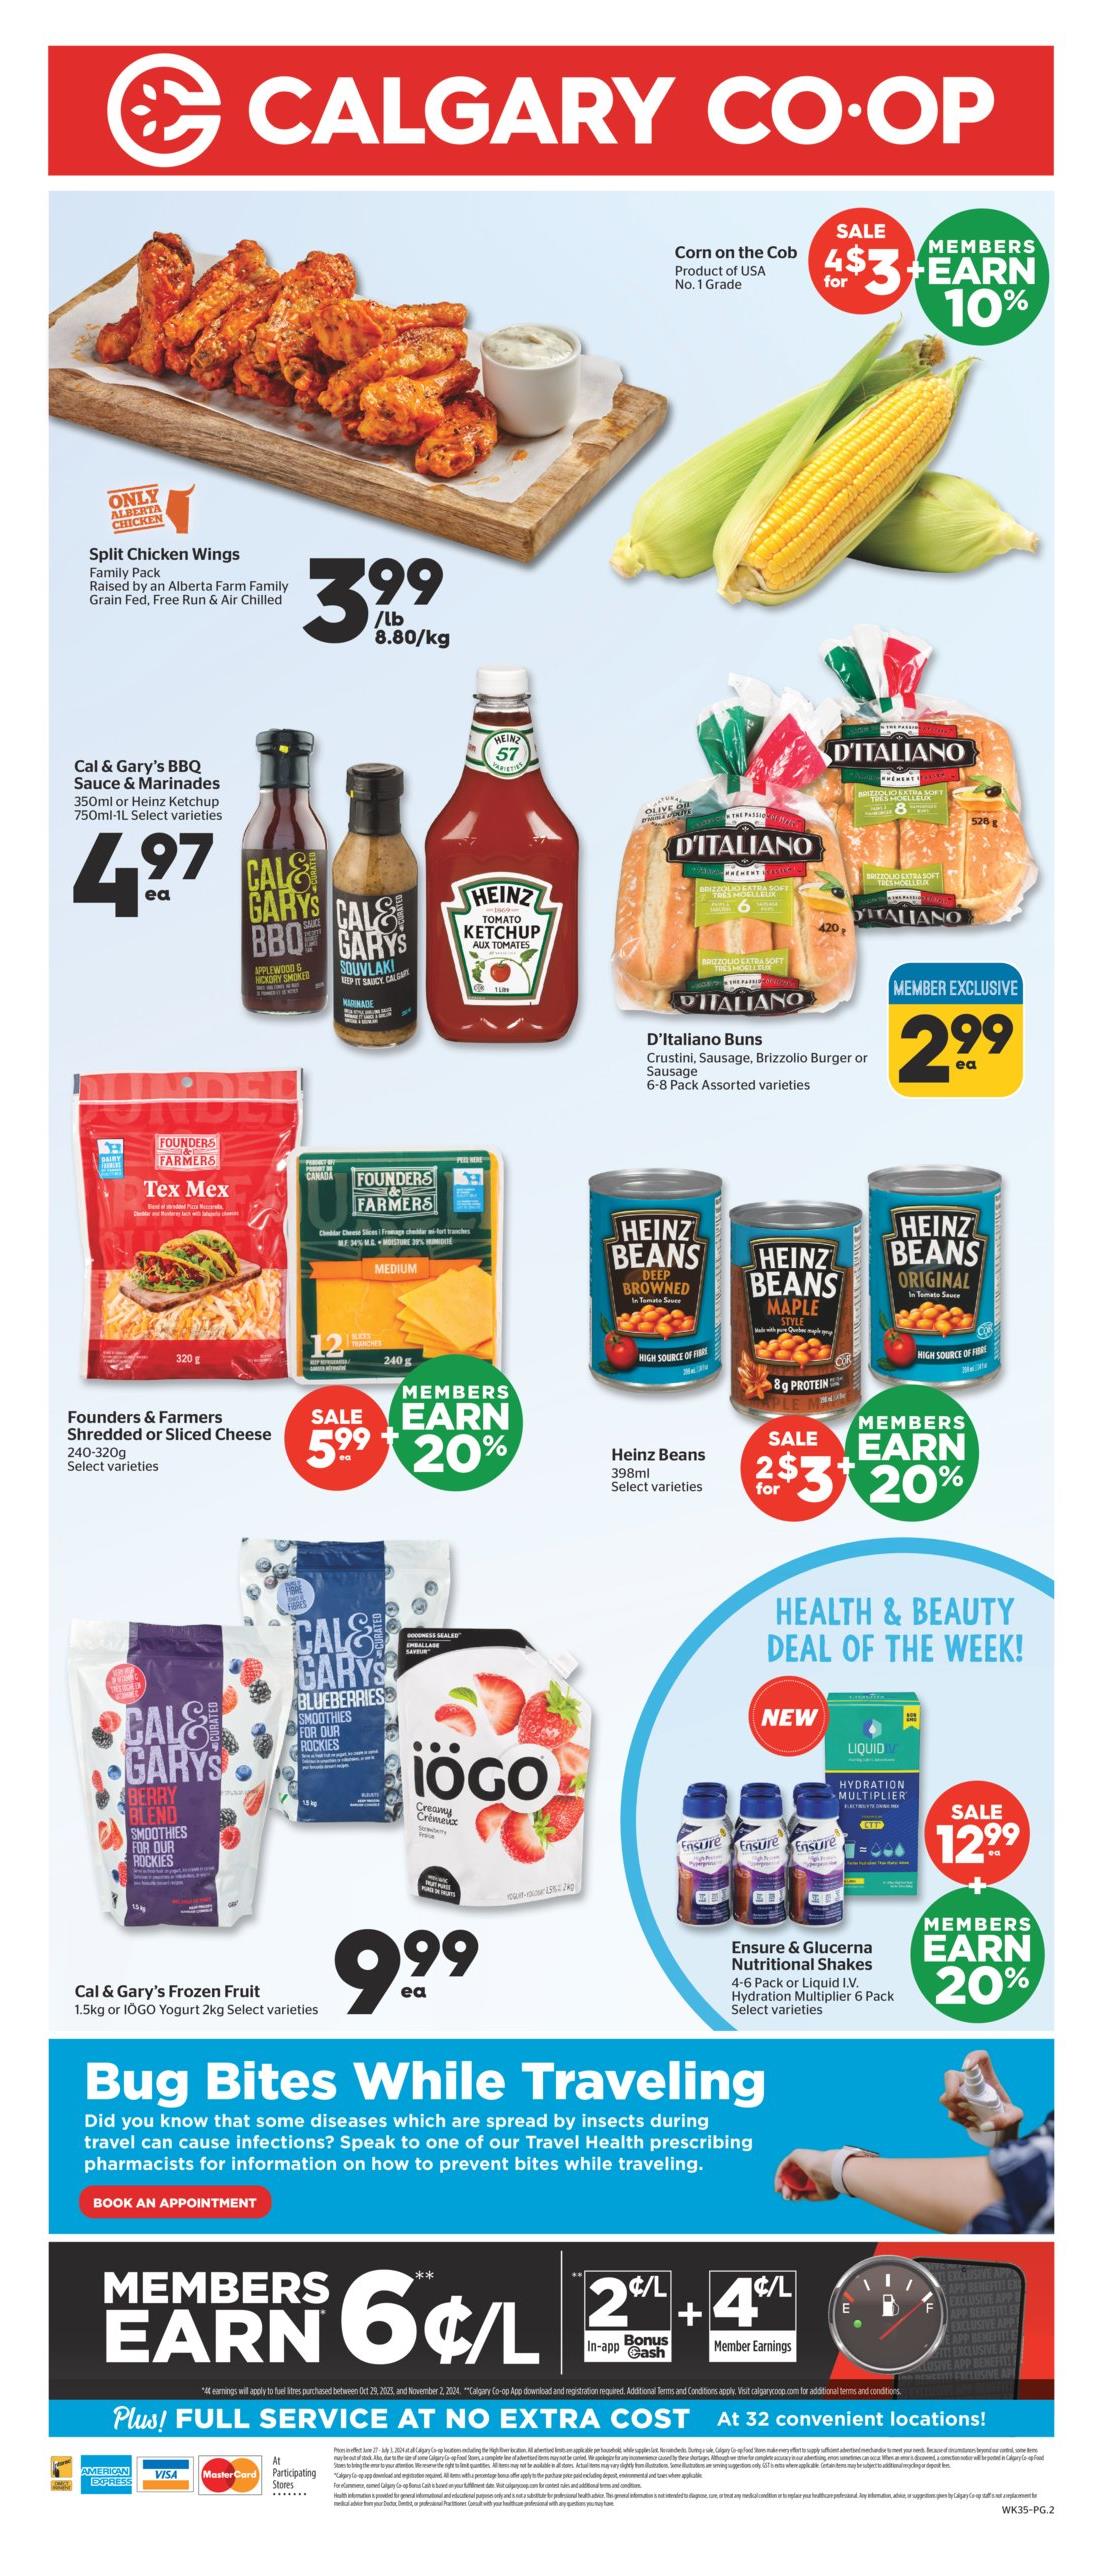 Calgary Co-op - Weekly Flyer Specials - Page 2